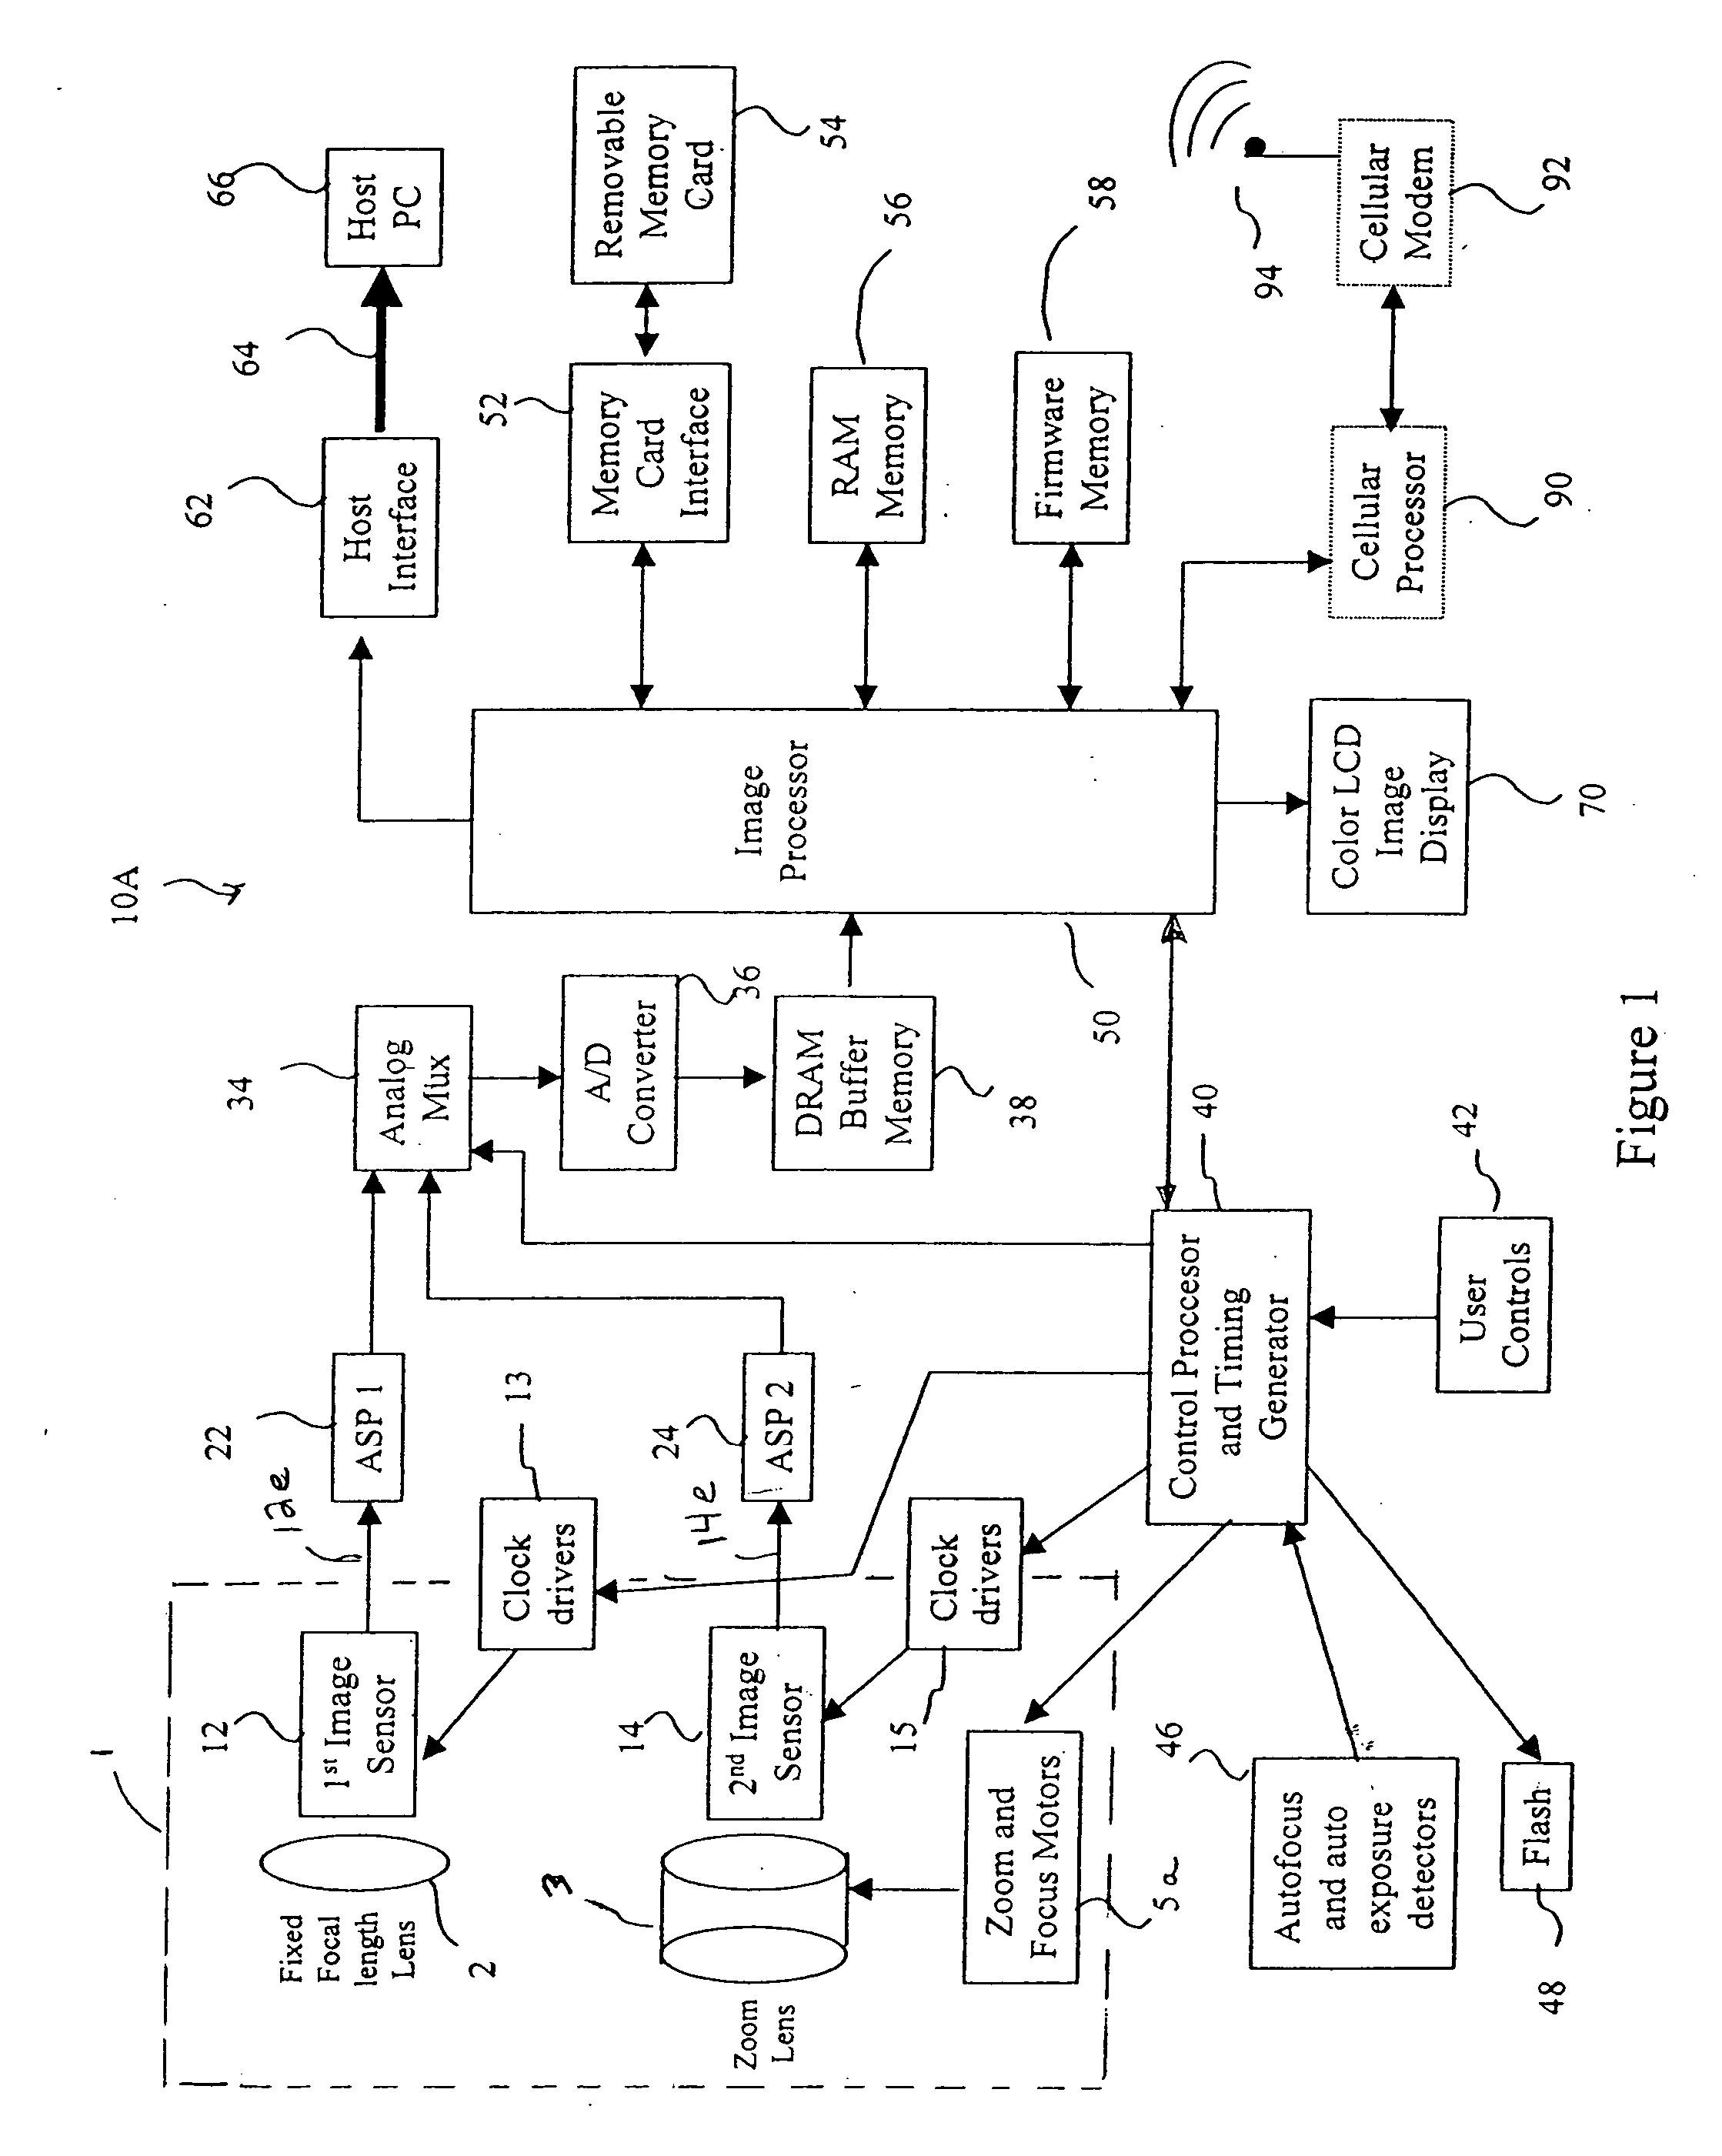 Compact image capture assembly using multiple lenses and image sensors to provide an extended zoom range